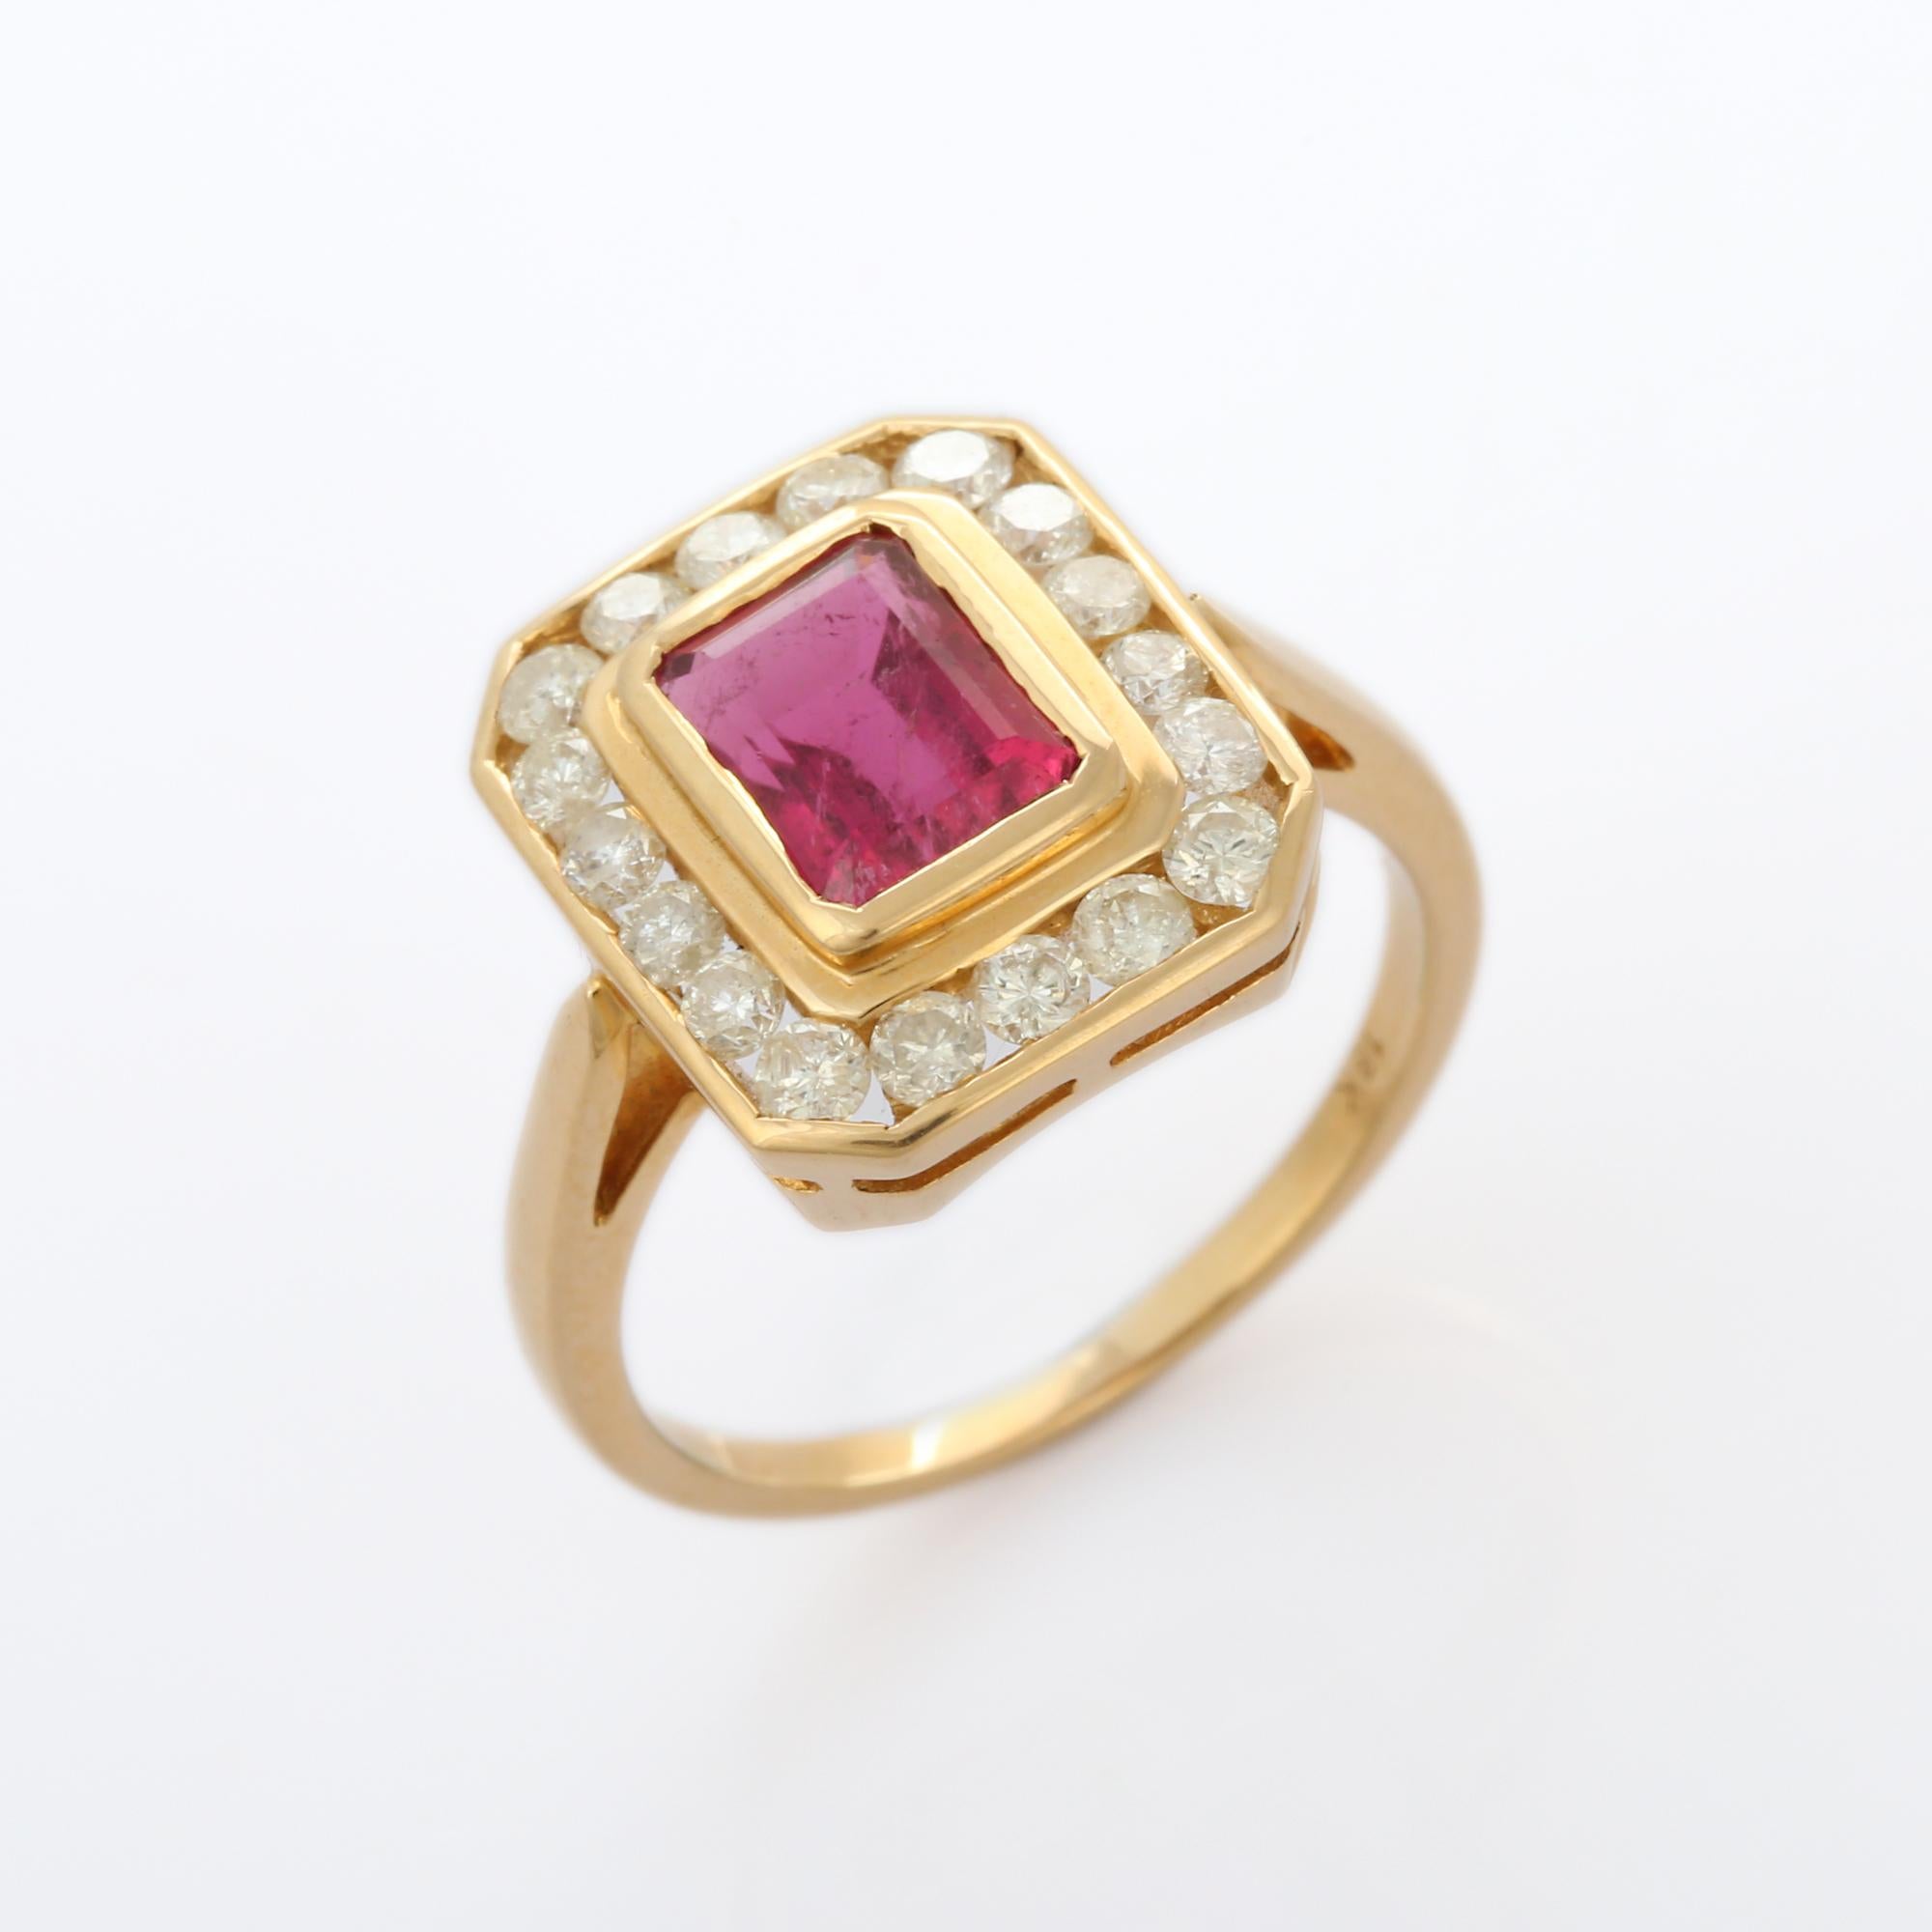 For Sale:  18K Yellow Gold Octagon Cut Ruby Diamond Engagement Ring 12